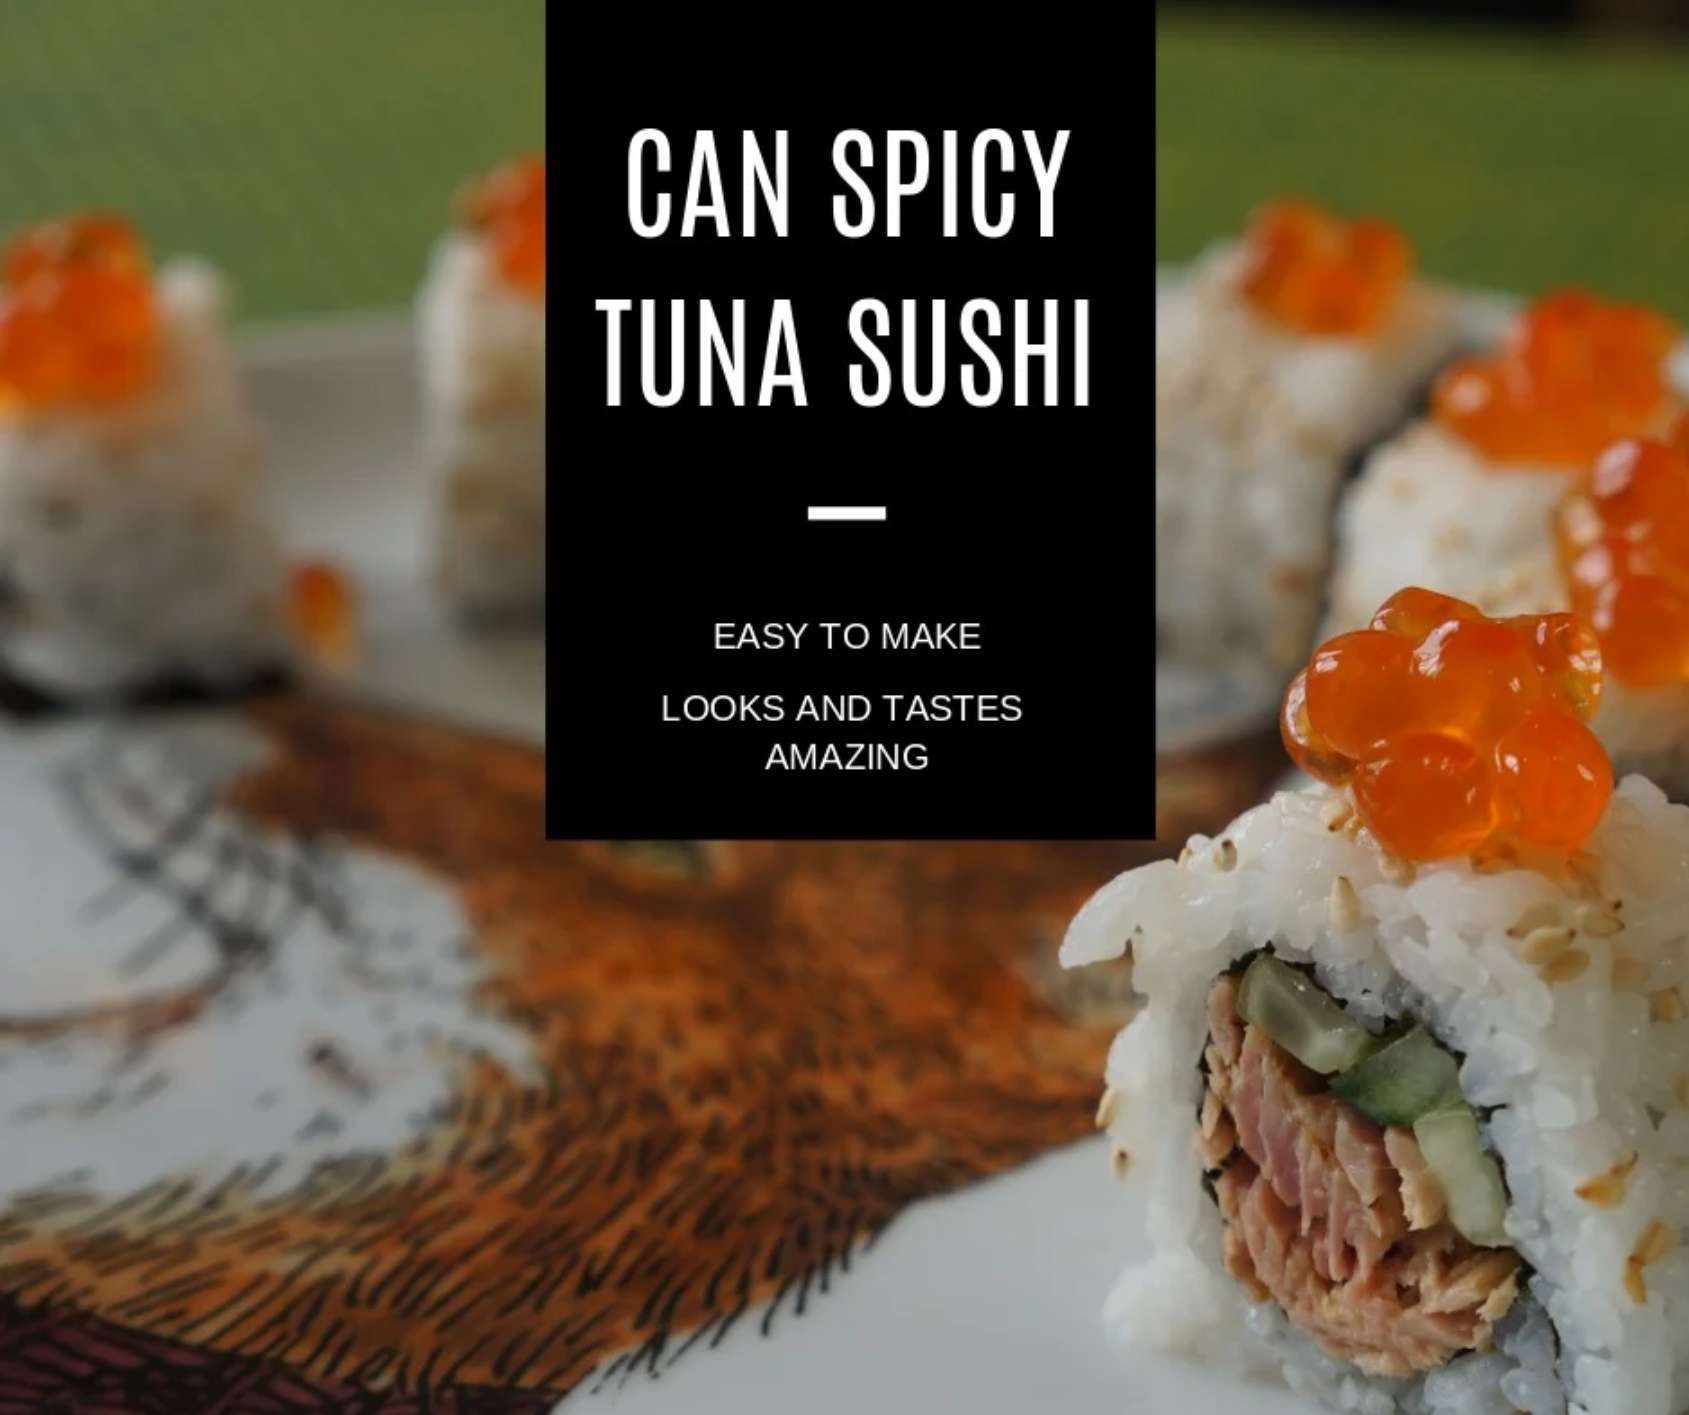 Canned Spicy Tuna Sushi Roll with a Twist